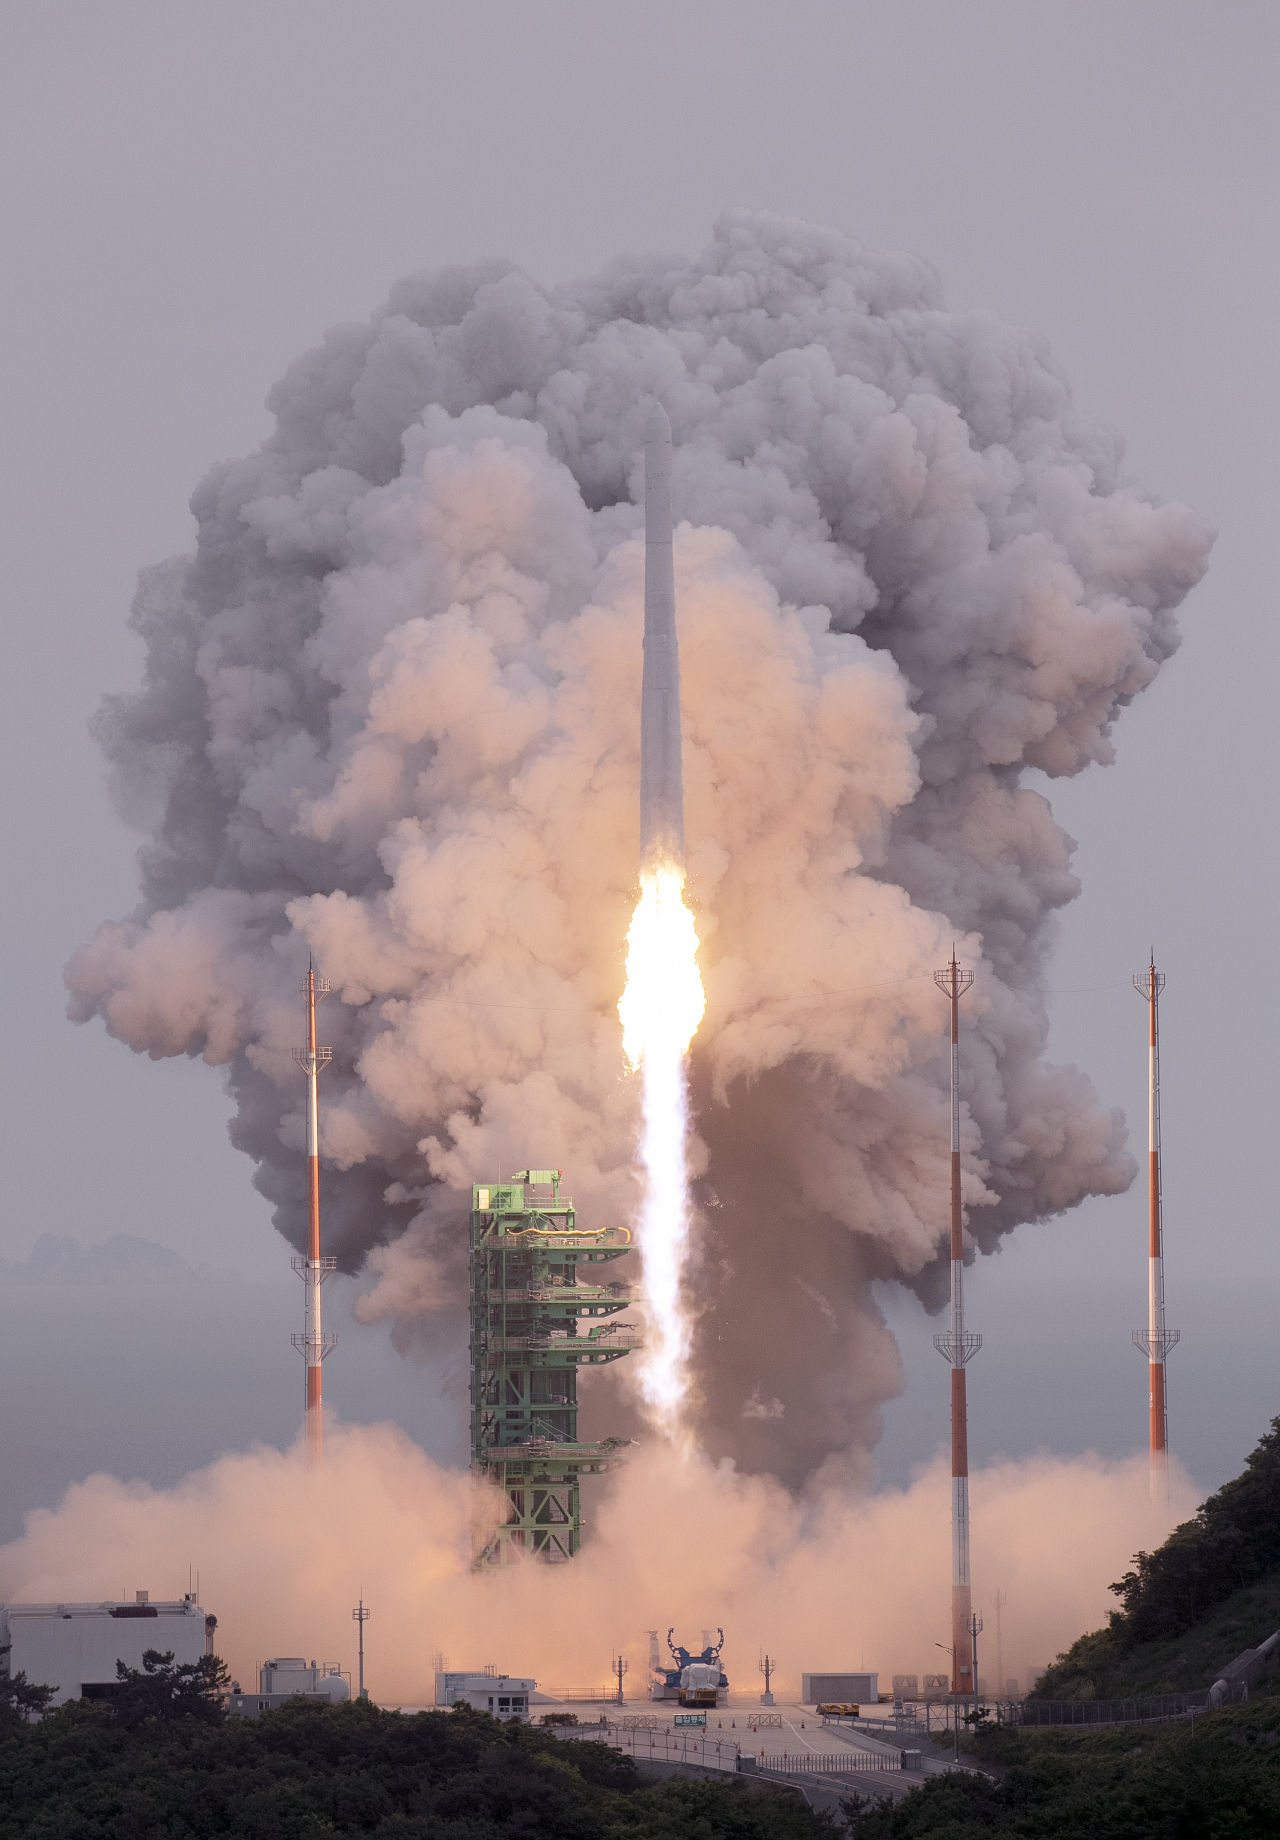 South Korea launches the homegrown Nuri rocket for the third time, Thursday at 6:24 p.m. from the Naro Space Center in Goheung, South Jeolla Province. (Ministry of Science and ICT)